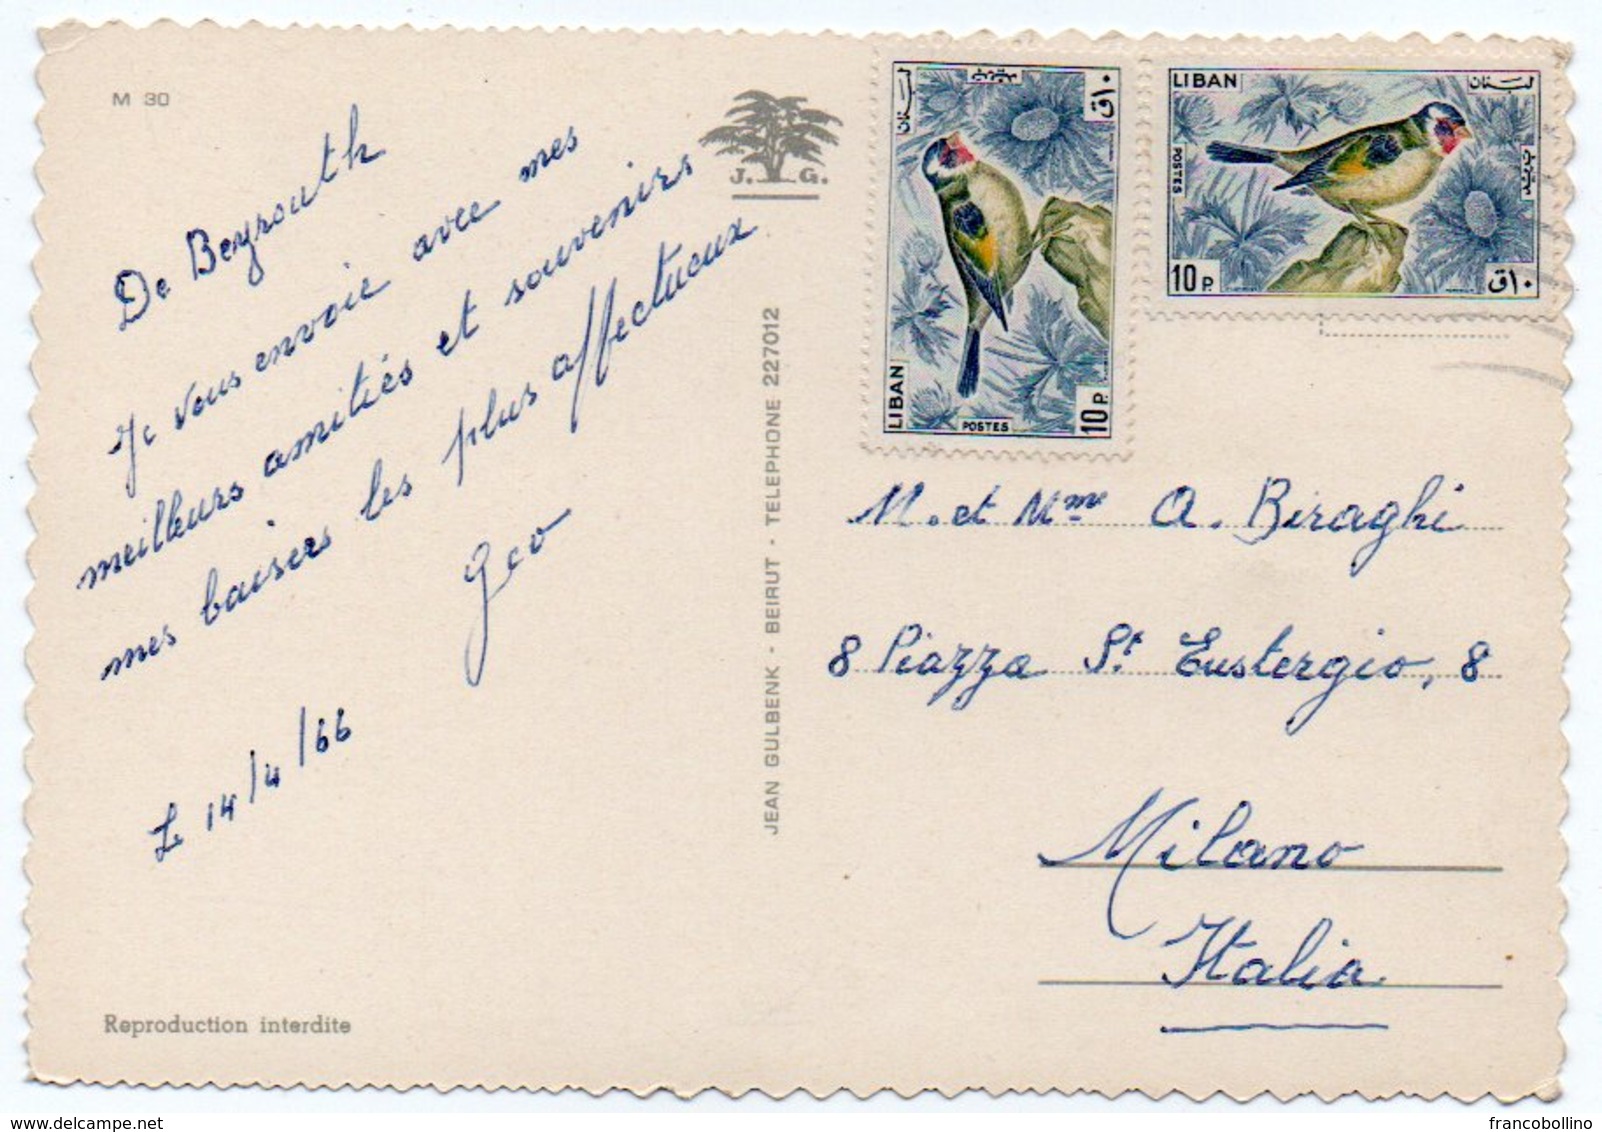 LIBAN/LEBANON - GREETINGS FROM BEIRUT/BEYROUTH / THEMATIC STAMPS-BIRD - Libano